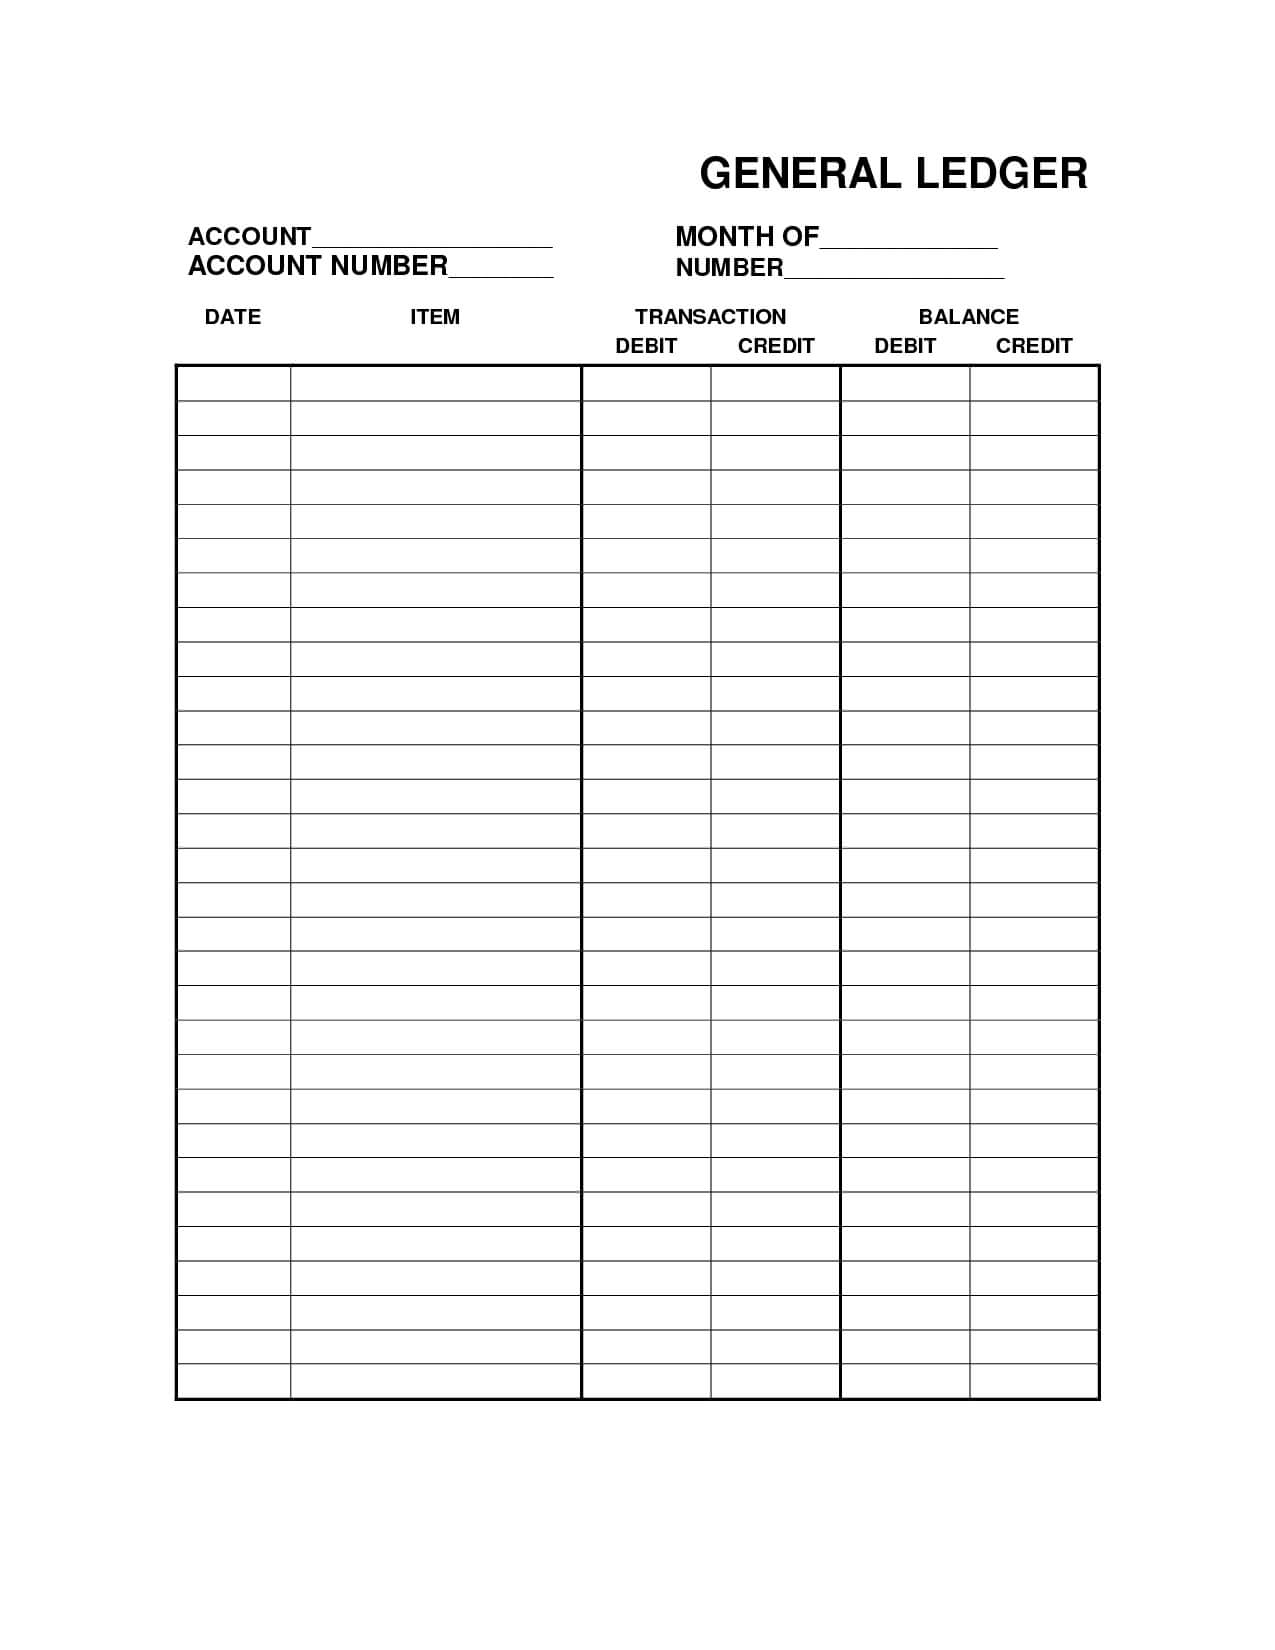 Debit And Credit Ledger Template - Google Search | Treasurer With Regard To Blank Ledger Template